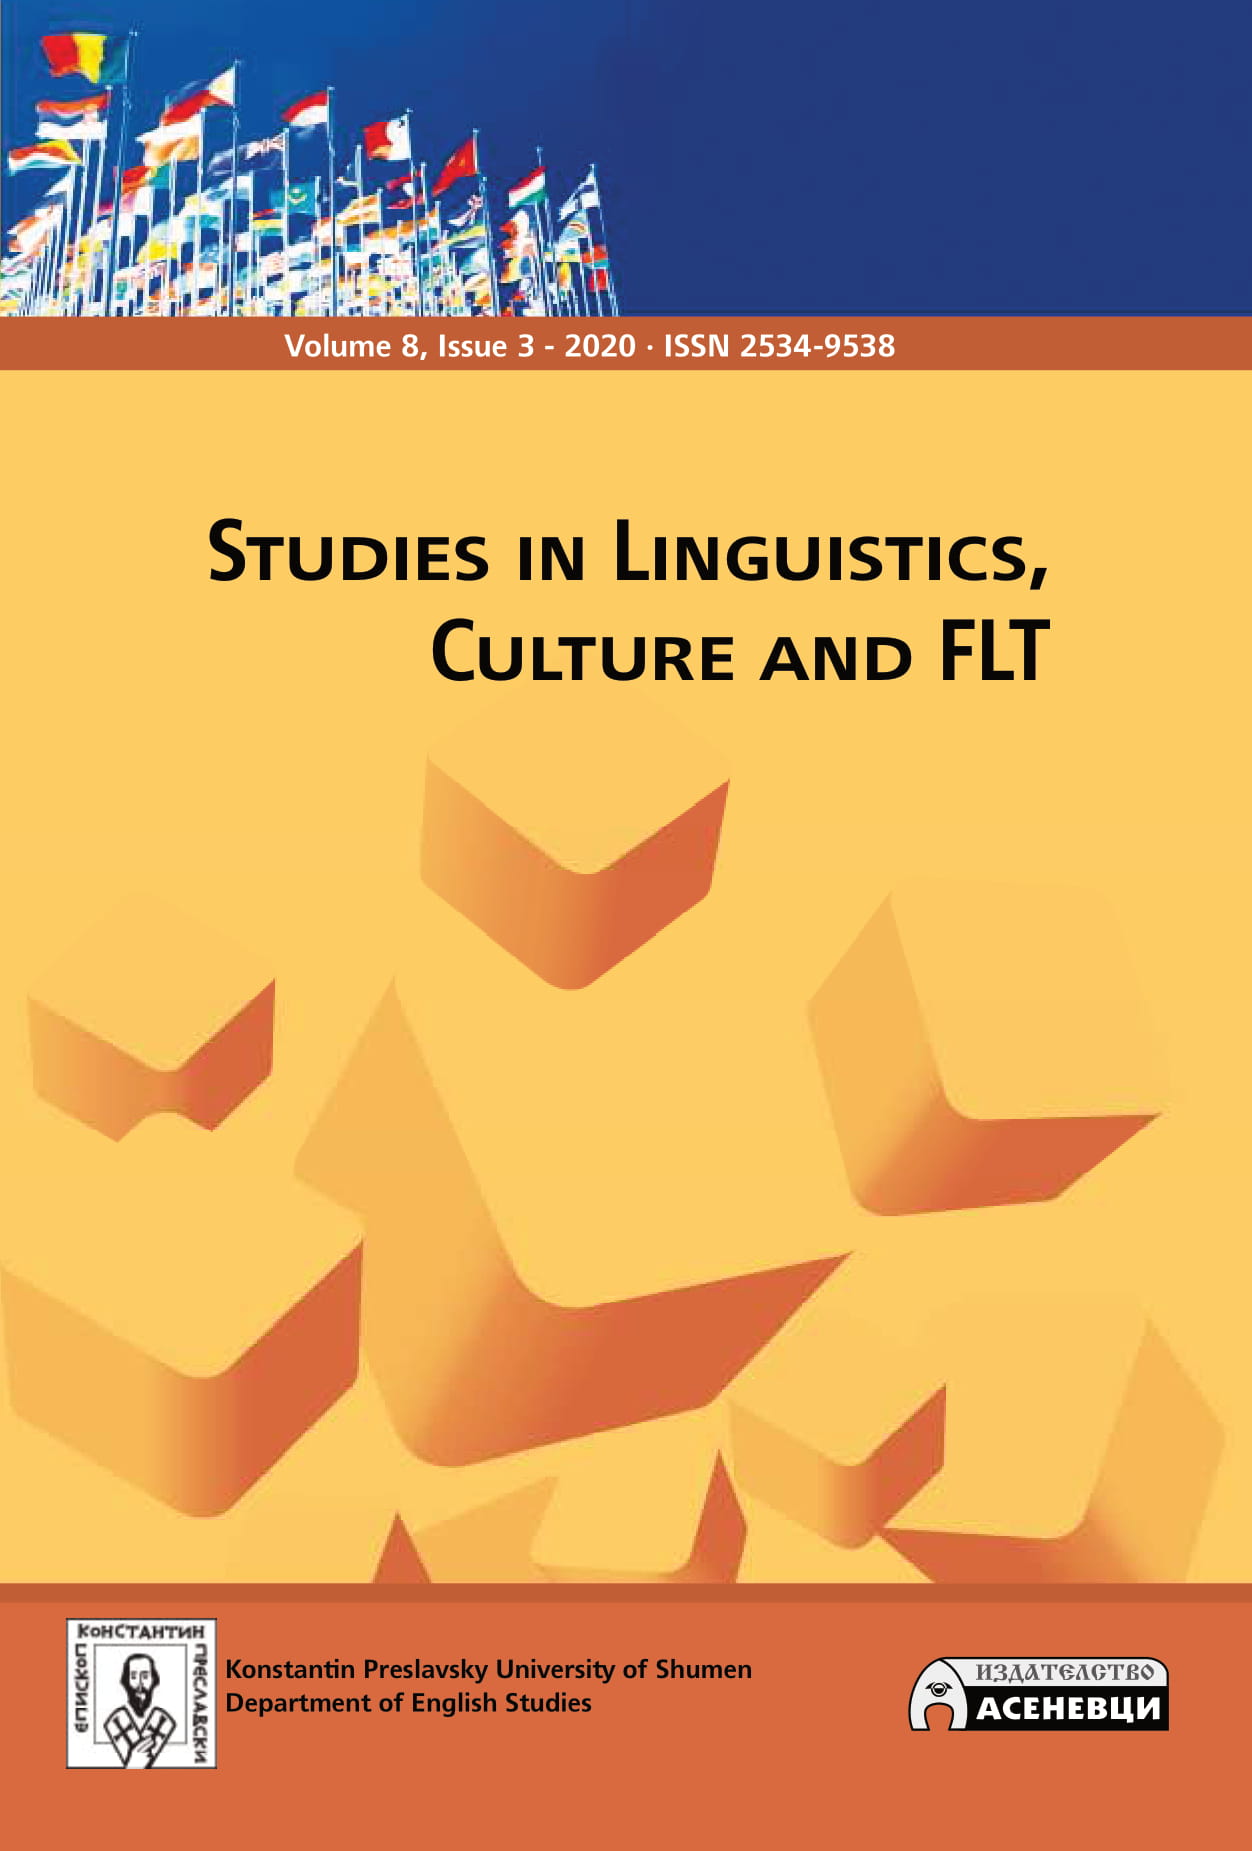 The Communicative Acts Of Sympathy And Condolence In English And Bulgarian– Pragmalinguistic Aspects